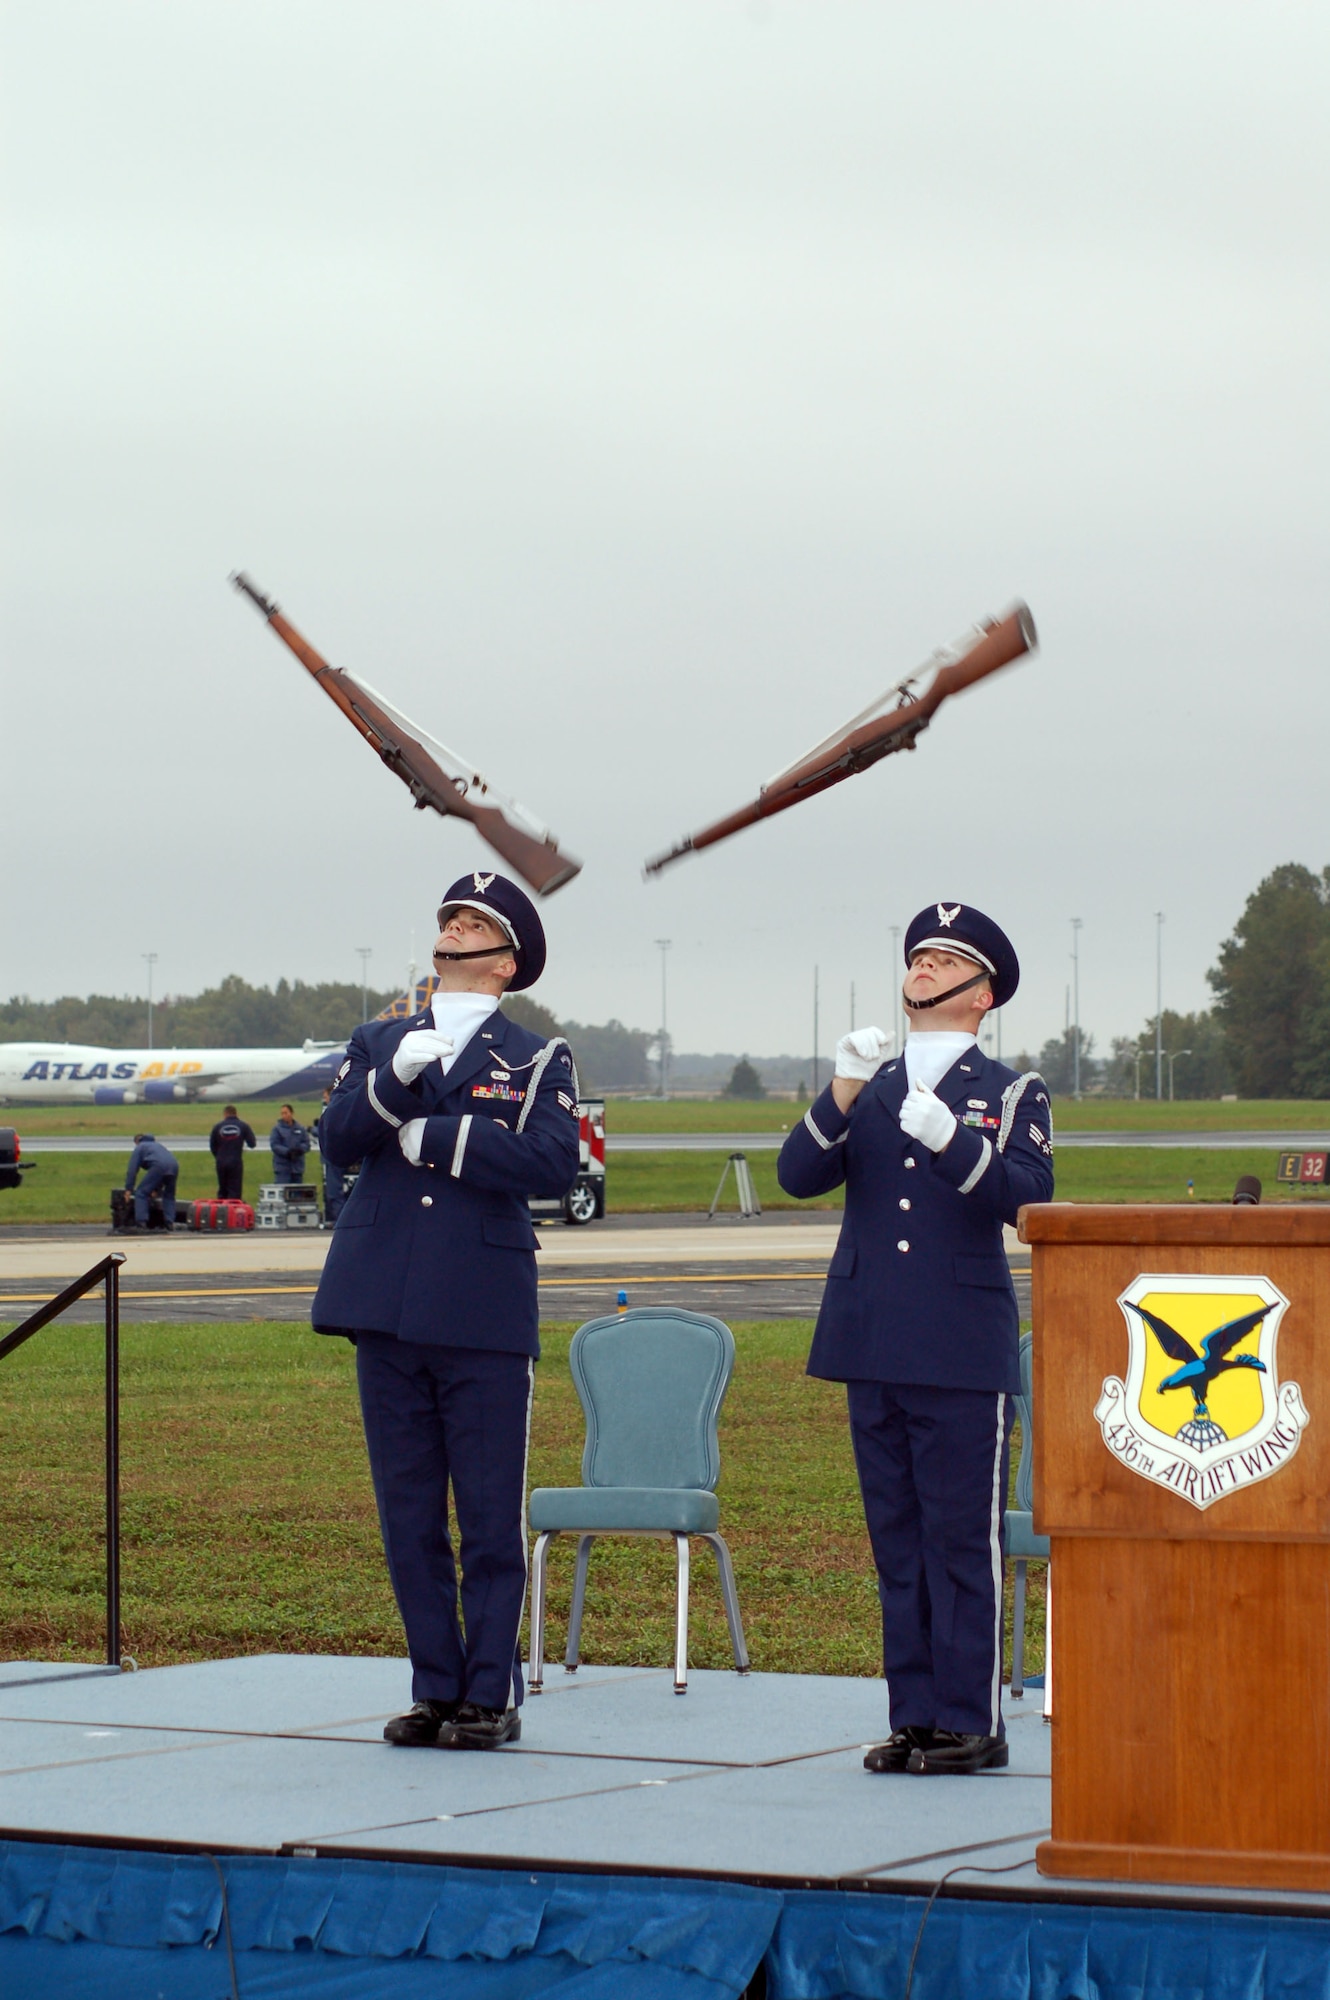 (Left to right) Senior Airmen Tony Riddle and Michael Majors, 436th Aircraft Maintenance Squadron and Dover Air Force Base Honor Guard members, spin their rifles into the air while performing a silent drill during the opening ceremony of the 2006 Dover Air Force Base Open House here Saturday. The team represents the United States Air Force in the showcase of professional drill performances at public and military venues, and serves to recruit, retain and increase awareness for the Air Force and the Air Force Honor Guard as the official “Ambassadors in Blue.” (U.S. Air Force photo/Staff Sgt. James Wilkinson)